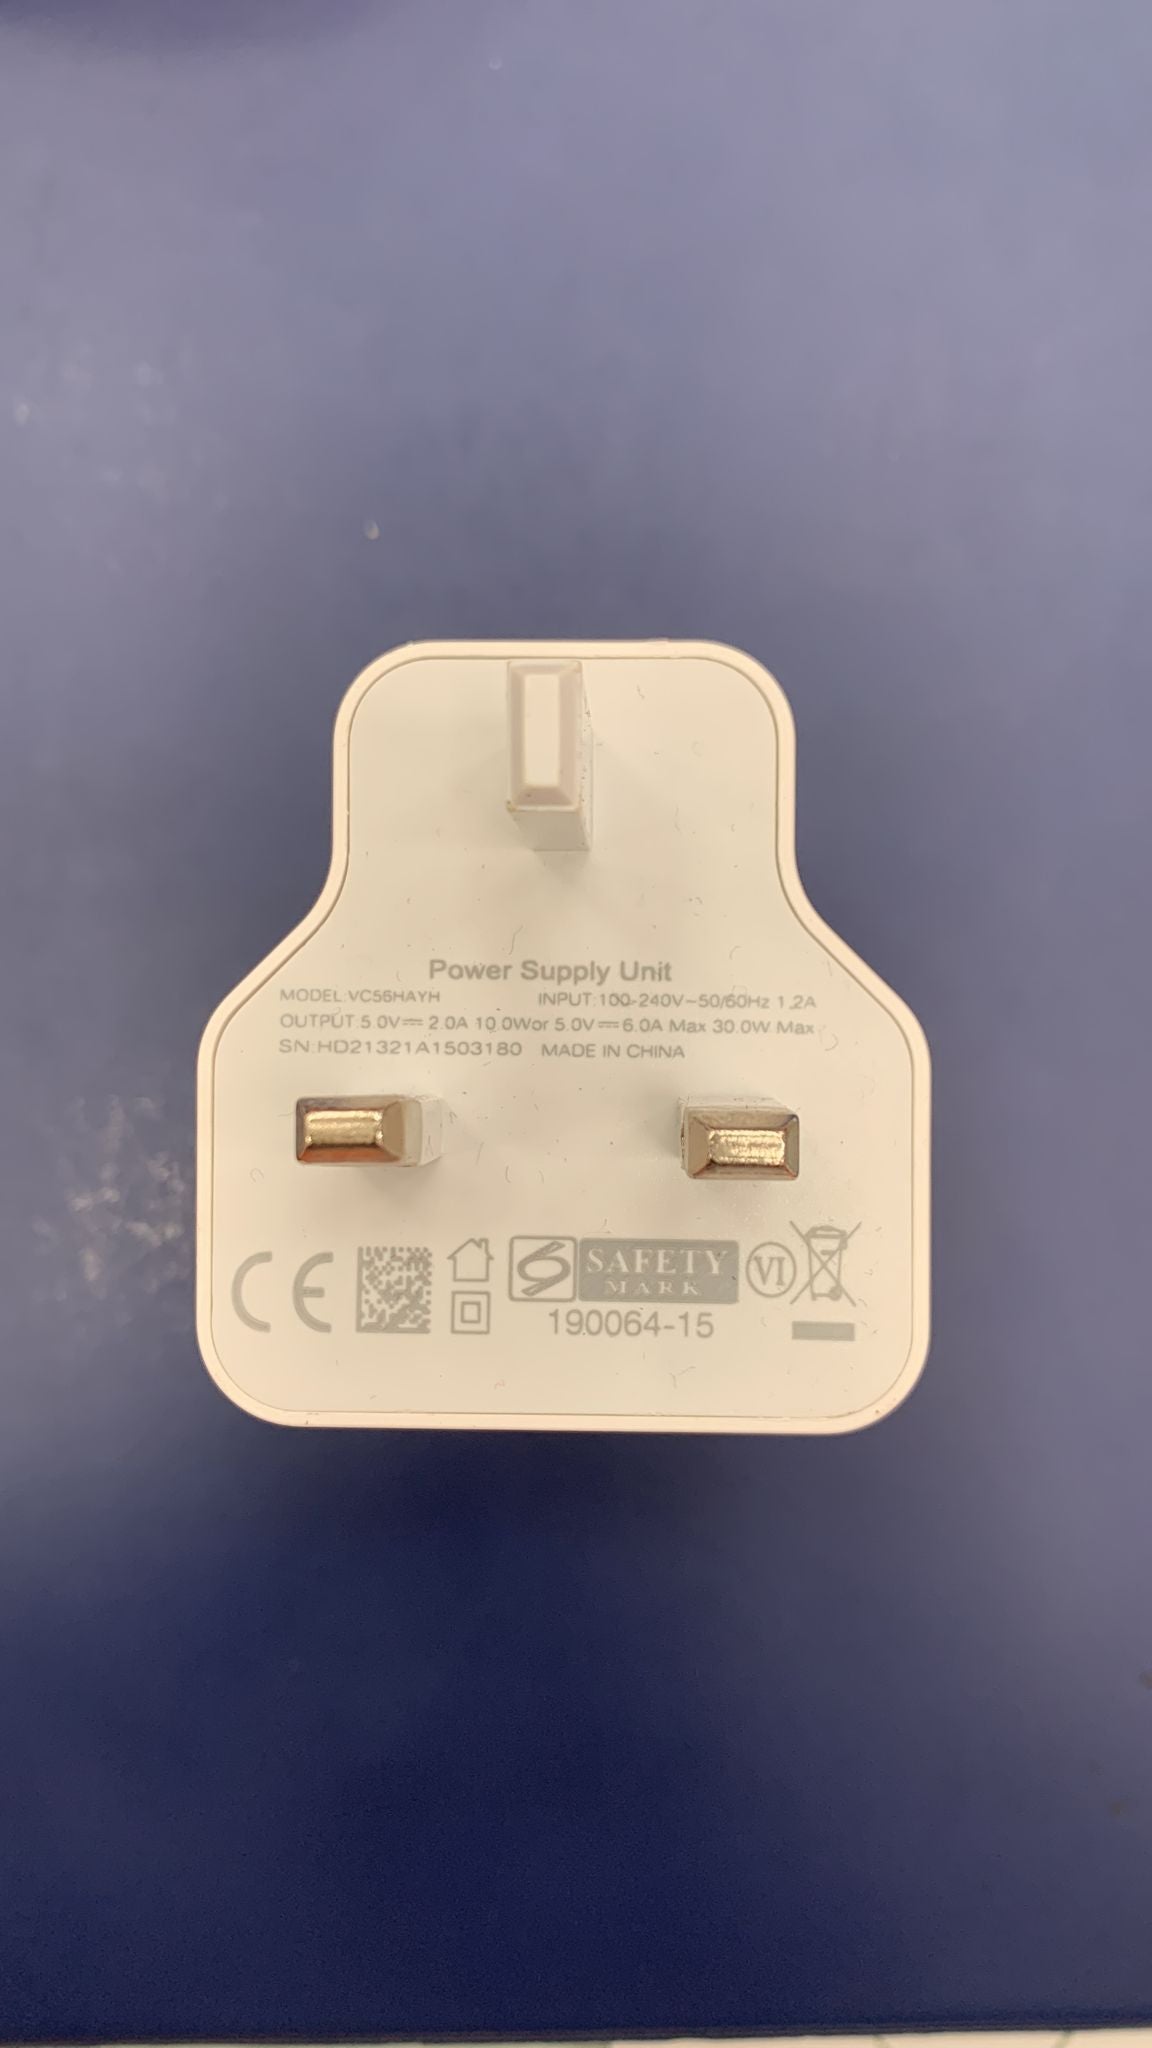 OnePlus USB 45W Wall Charger